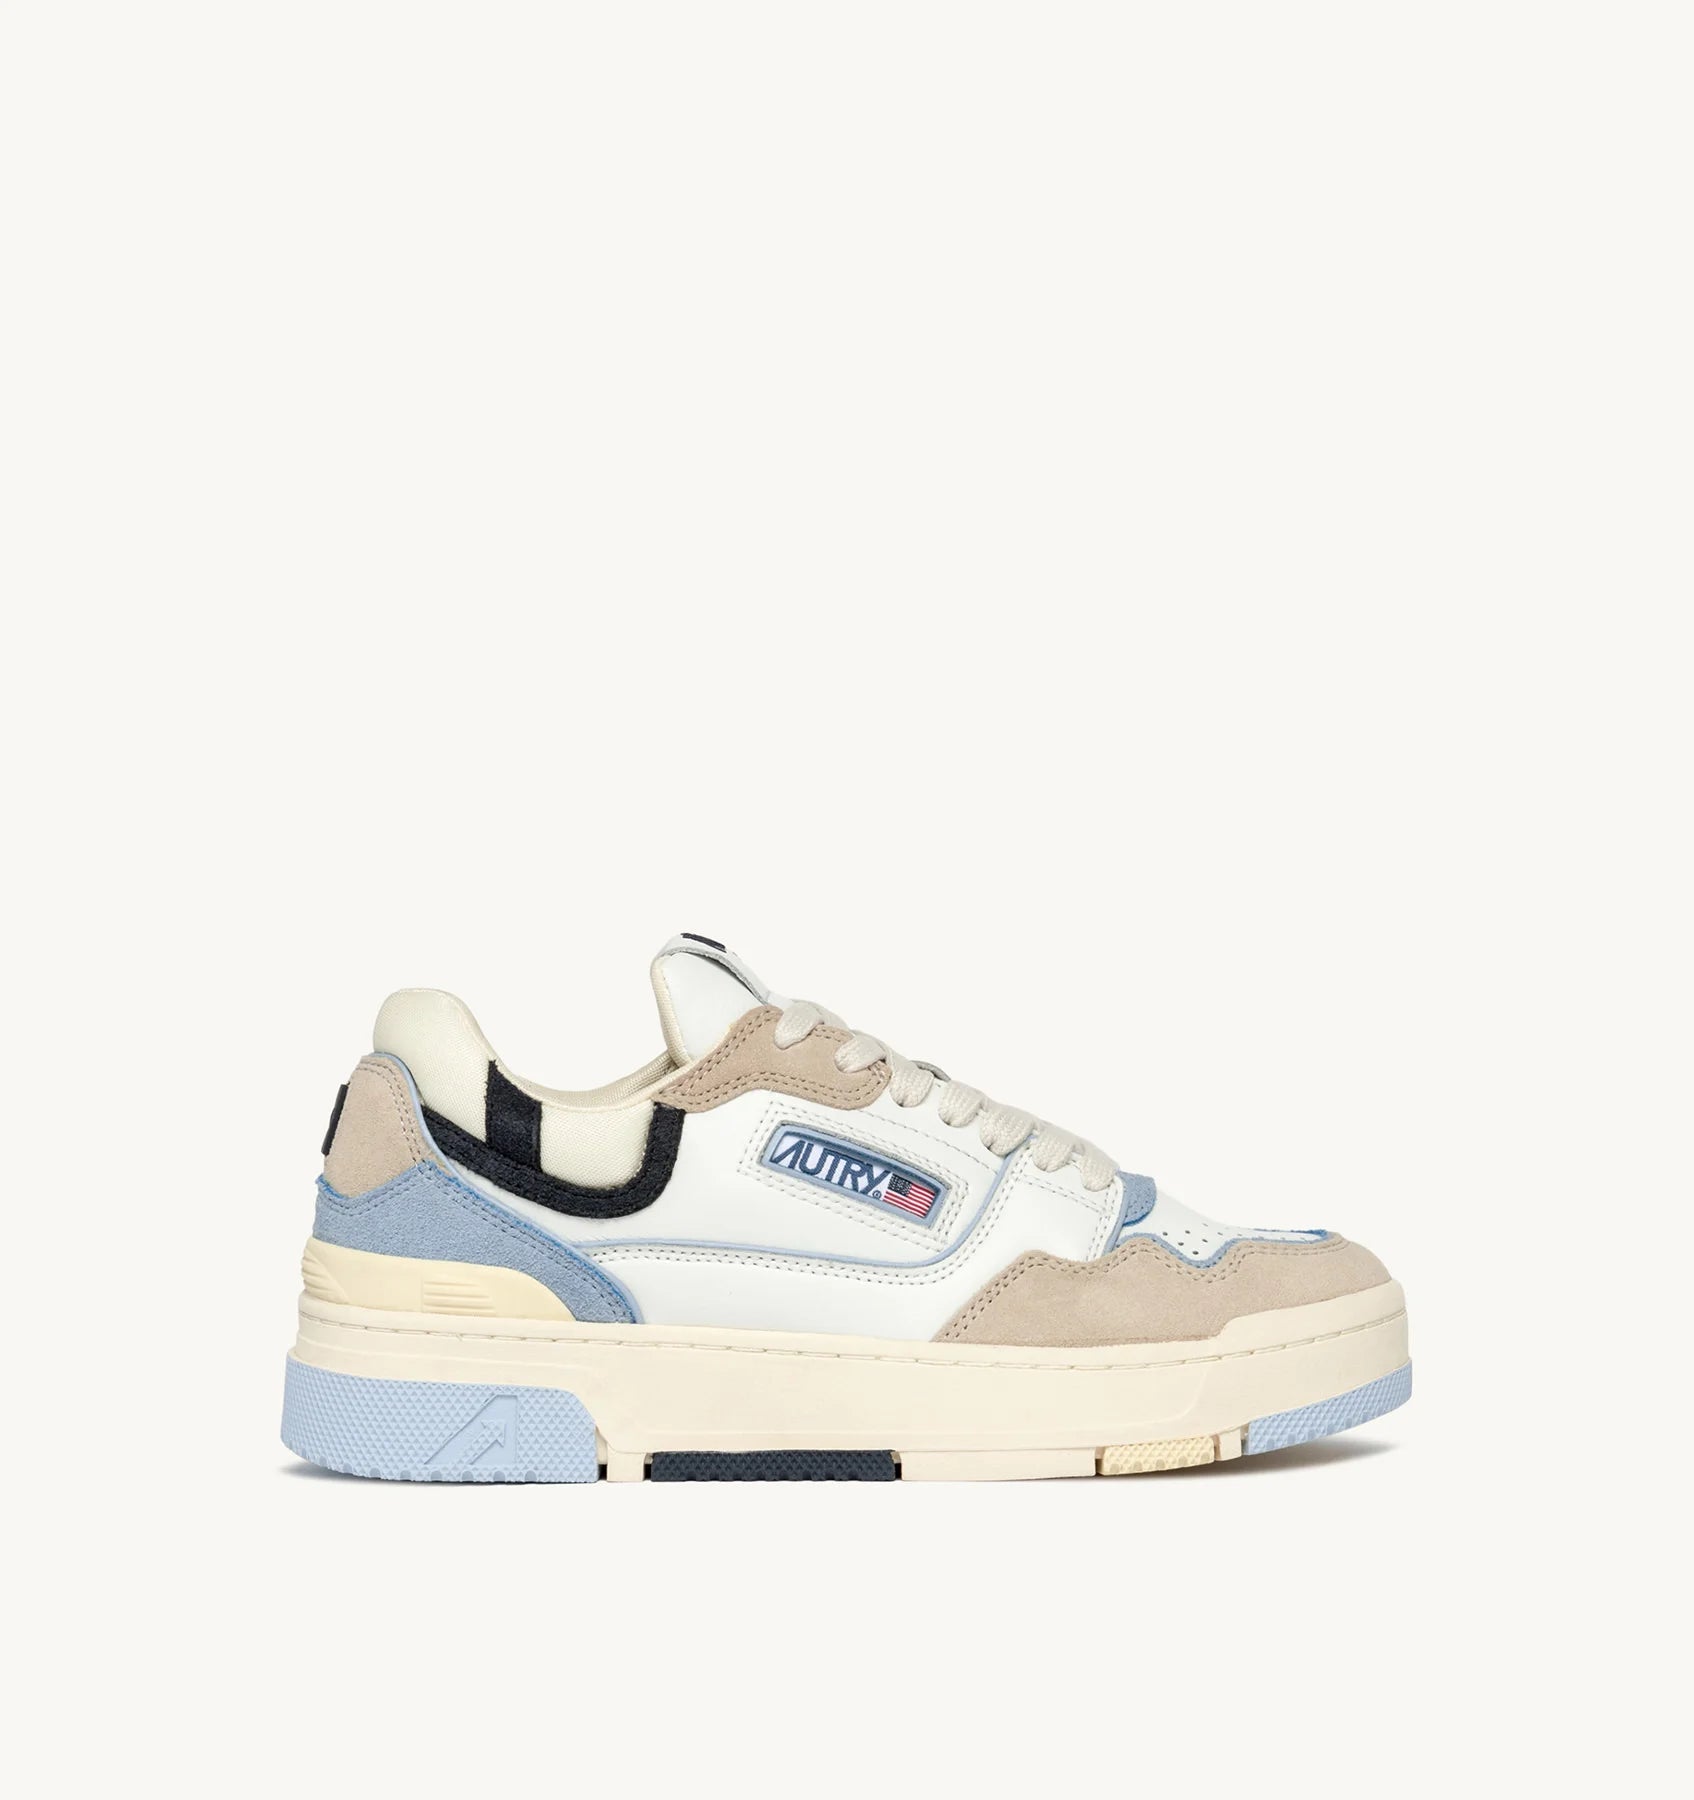 Autry CLC Sneakers in White and Two-Tone Suede - Den Lille Ida - Autry